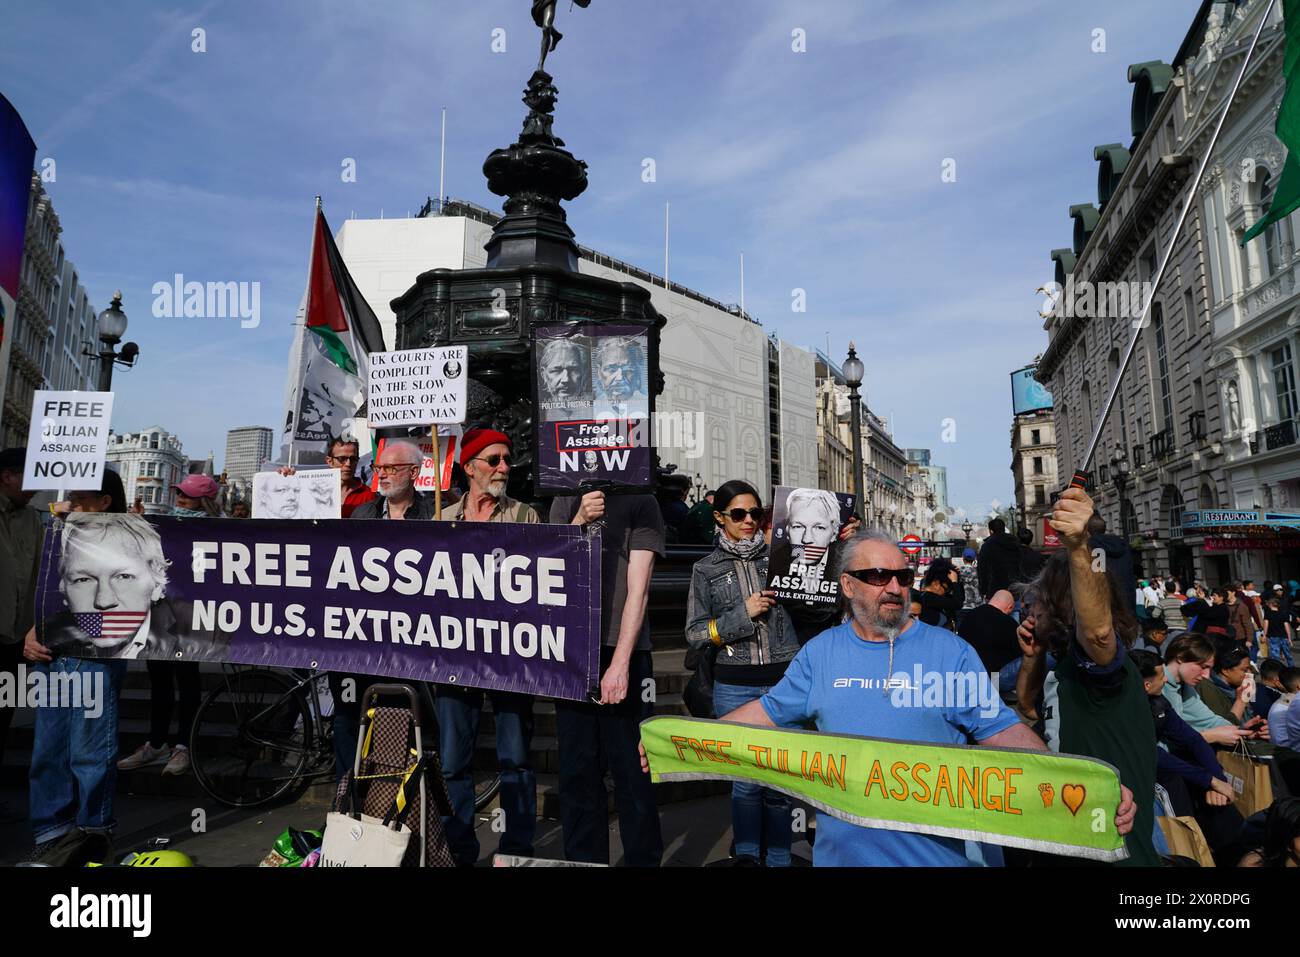 RECORD DATE NOT STATED Protest for Julian Assange at Piccadilly Circus in London Protest for Julian Assange at Piccadilly Circus in London. This week marks 5 years since his capture and incarceration. London England United Kingdom Copyright: xJoaoxDanielxPereirax Stock Photo